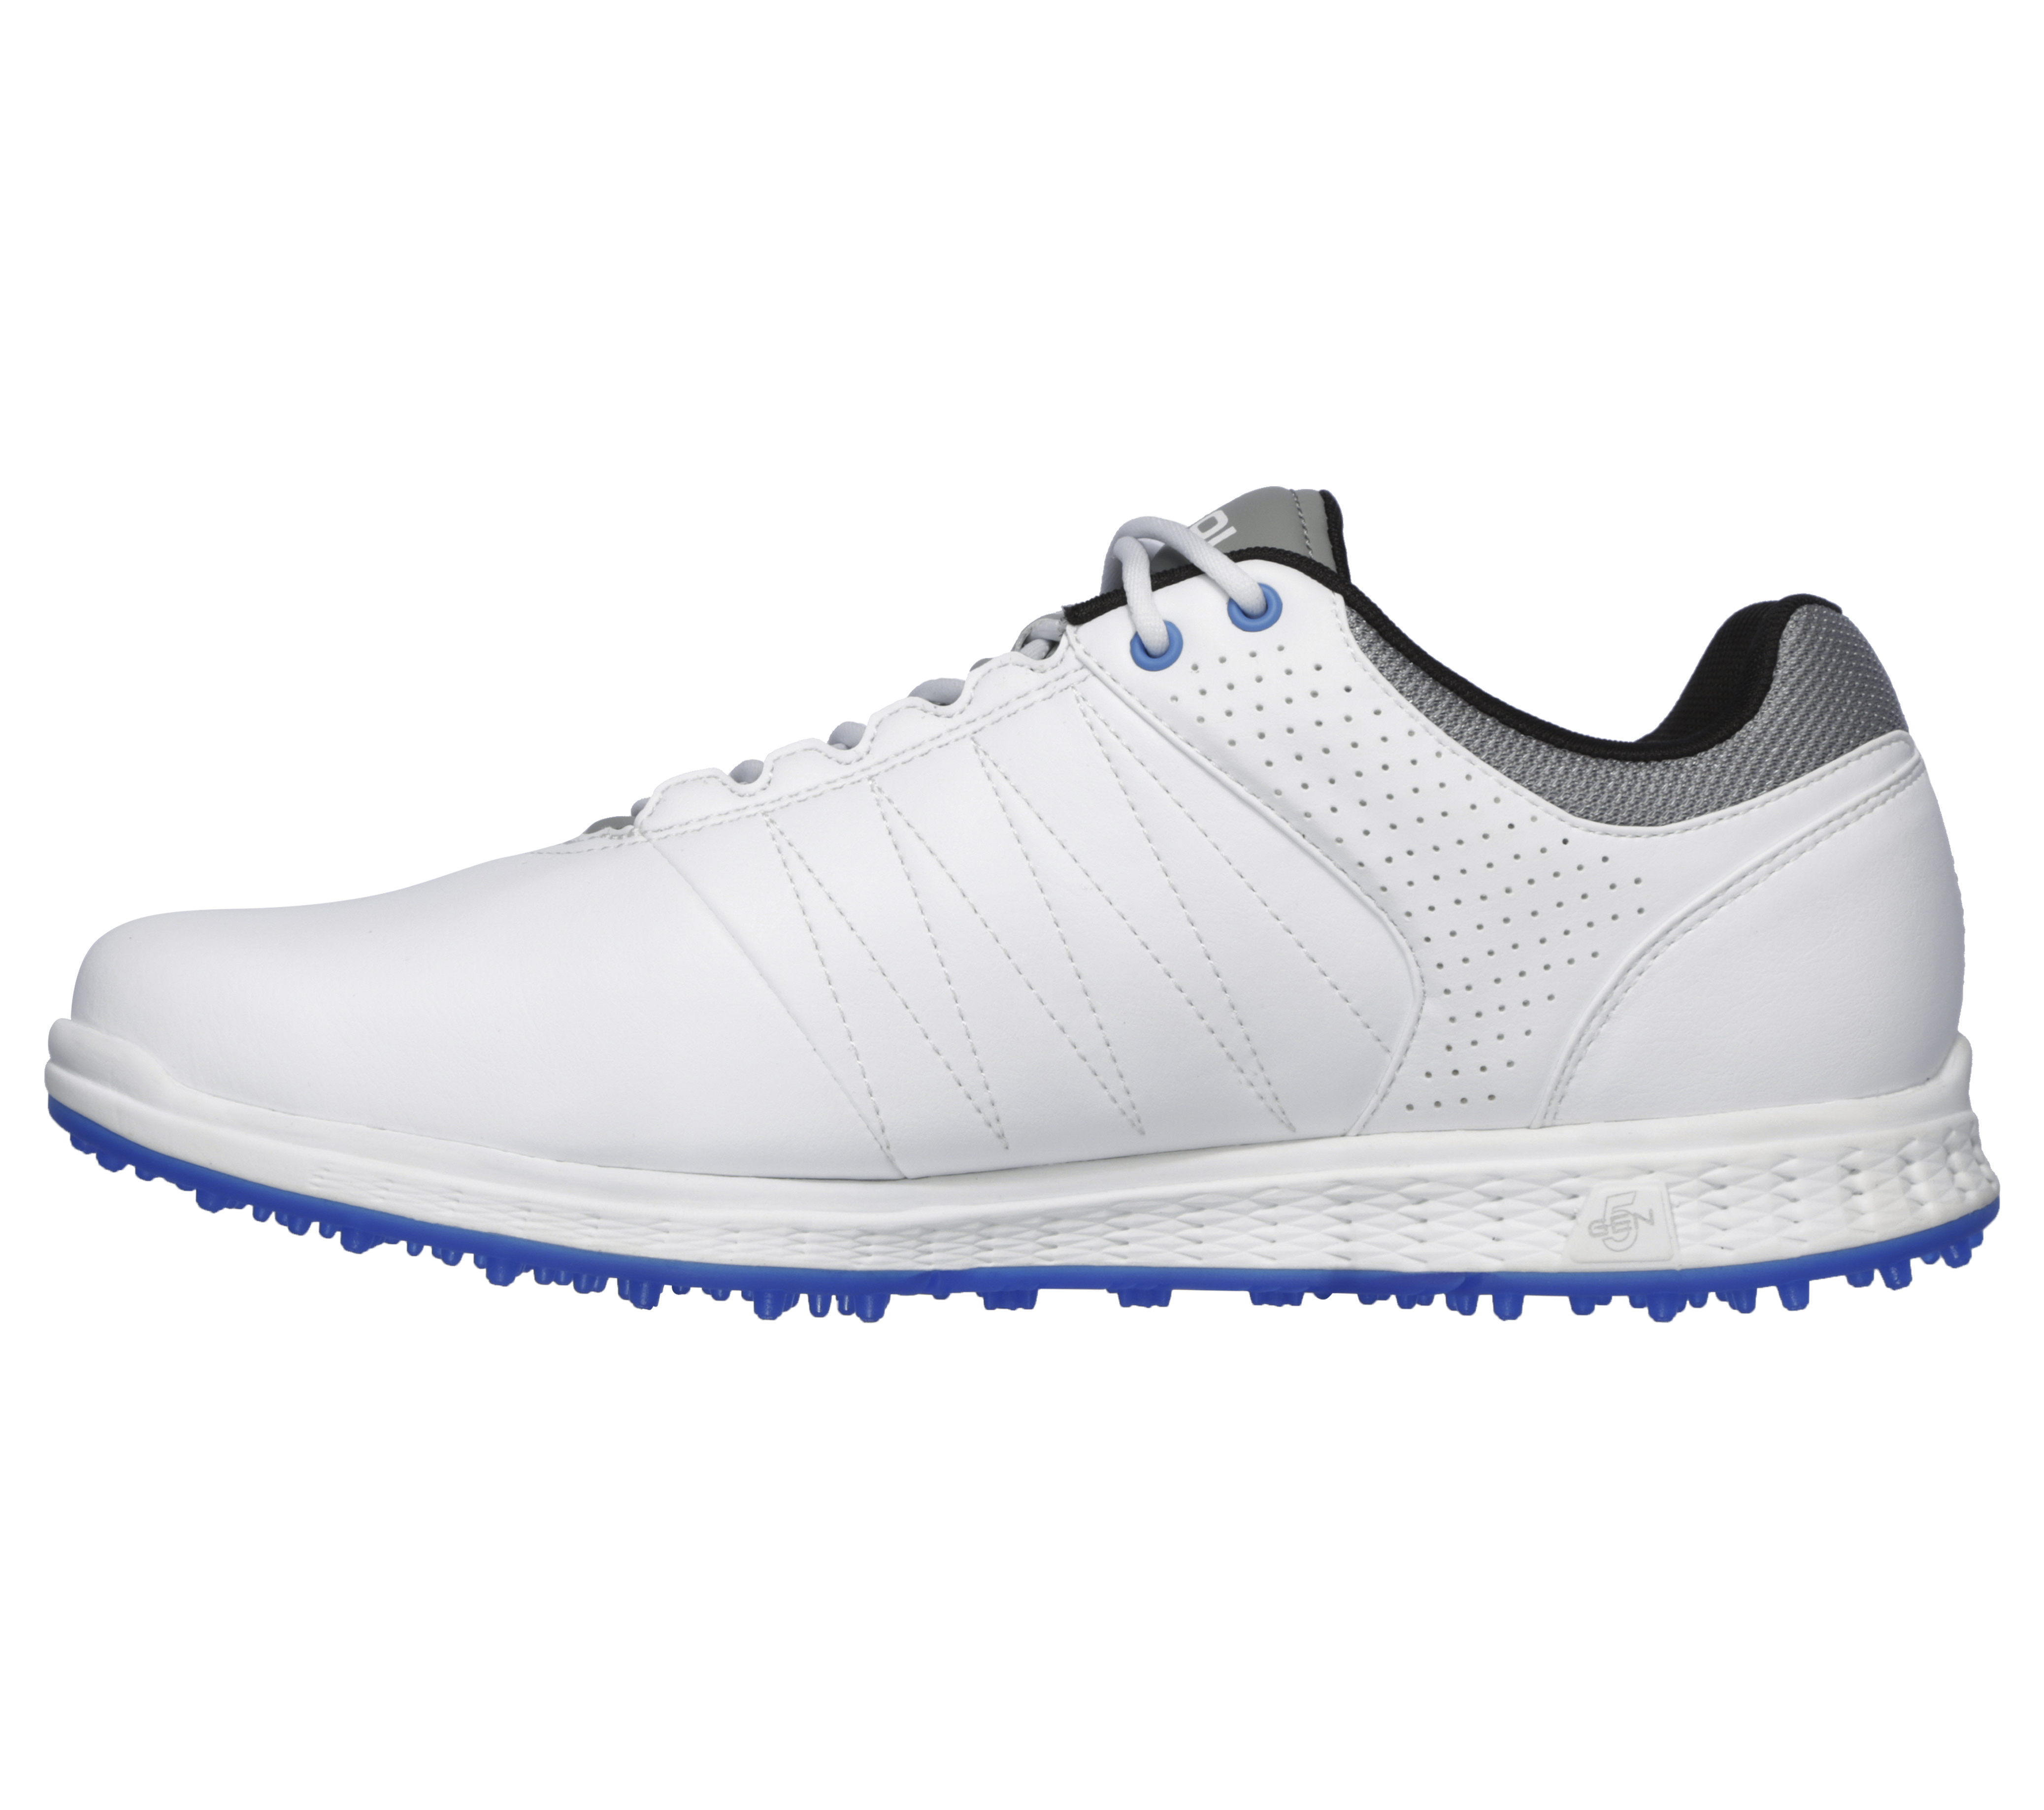 skechers golf shoes wide sizes